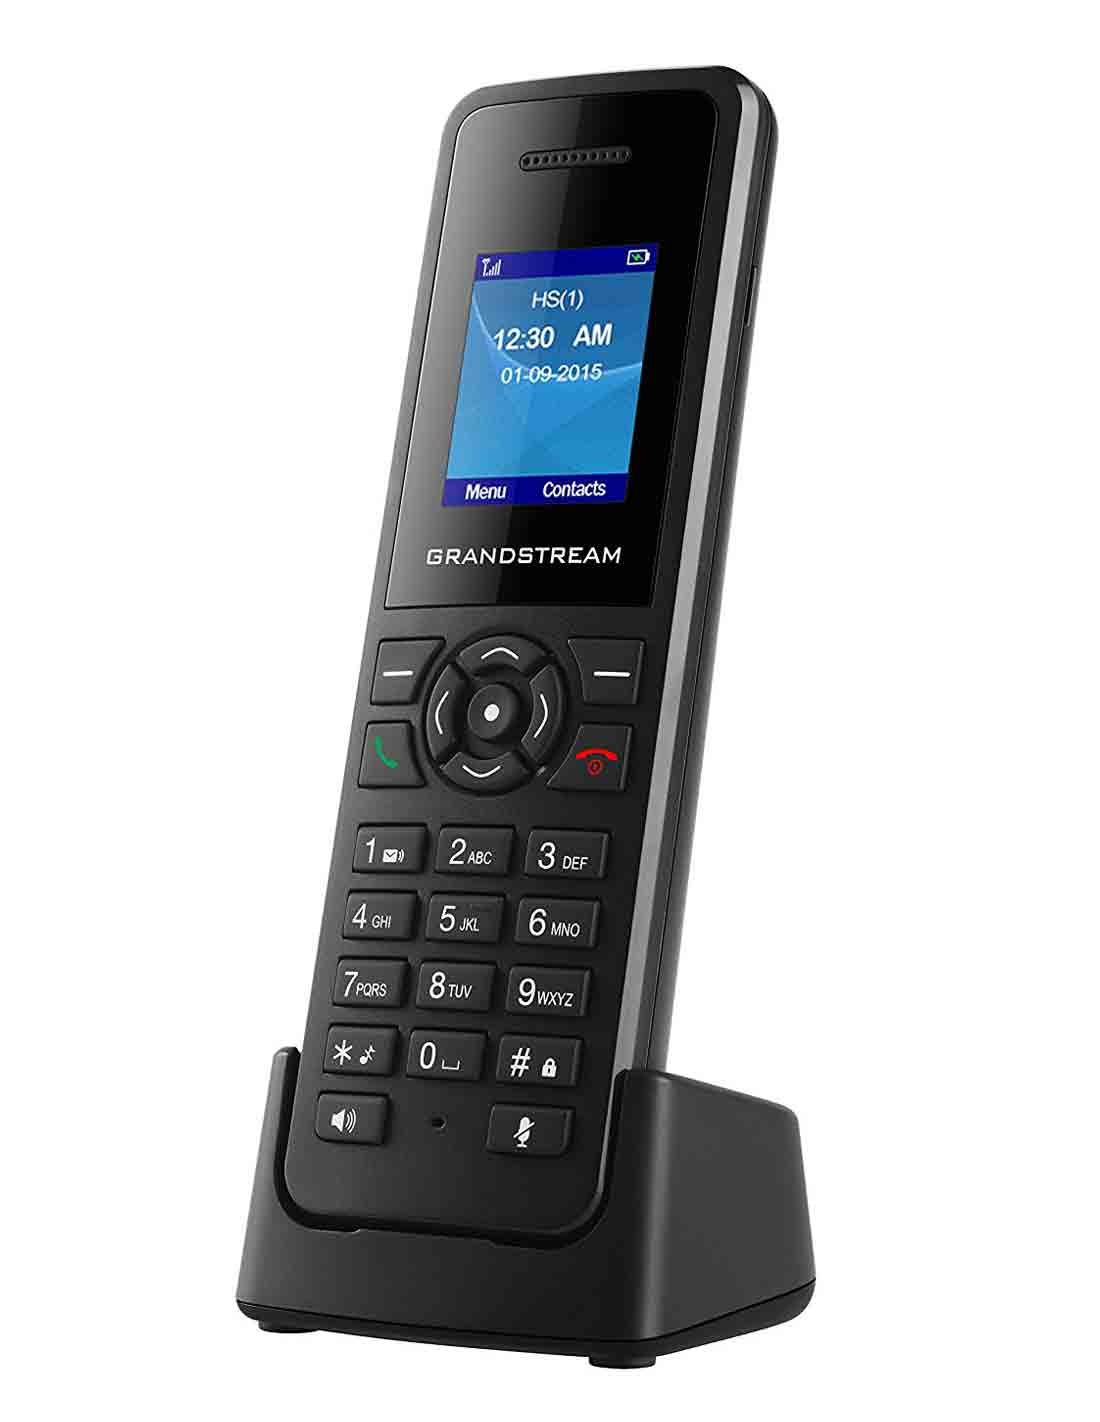 Grandstream DP720 DECT Cordless HD Handset at a cheap price and free delivery in Dubai